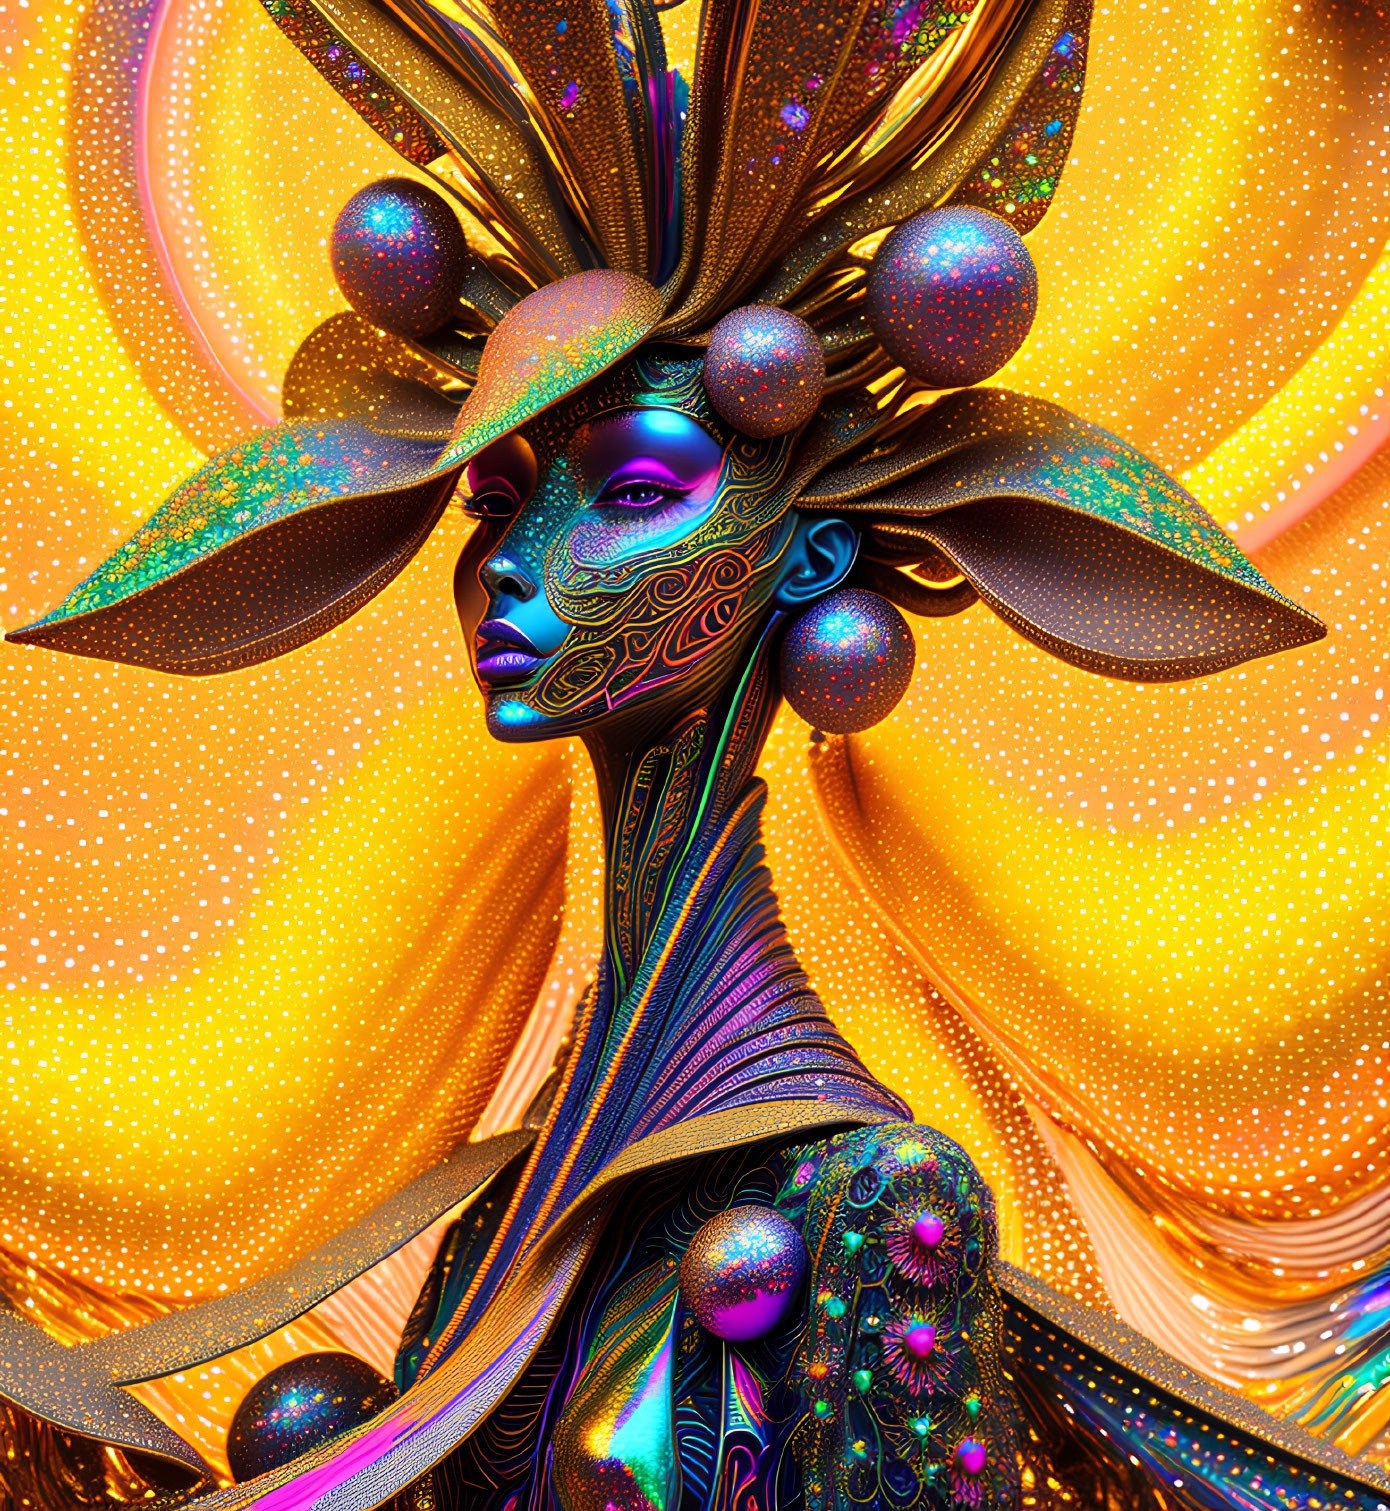 Colorful digital artwork: Female figure with cosmic and floral motifs in gold, blue, and orange.